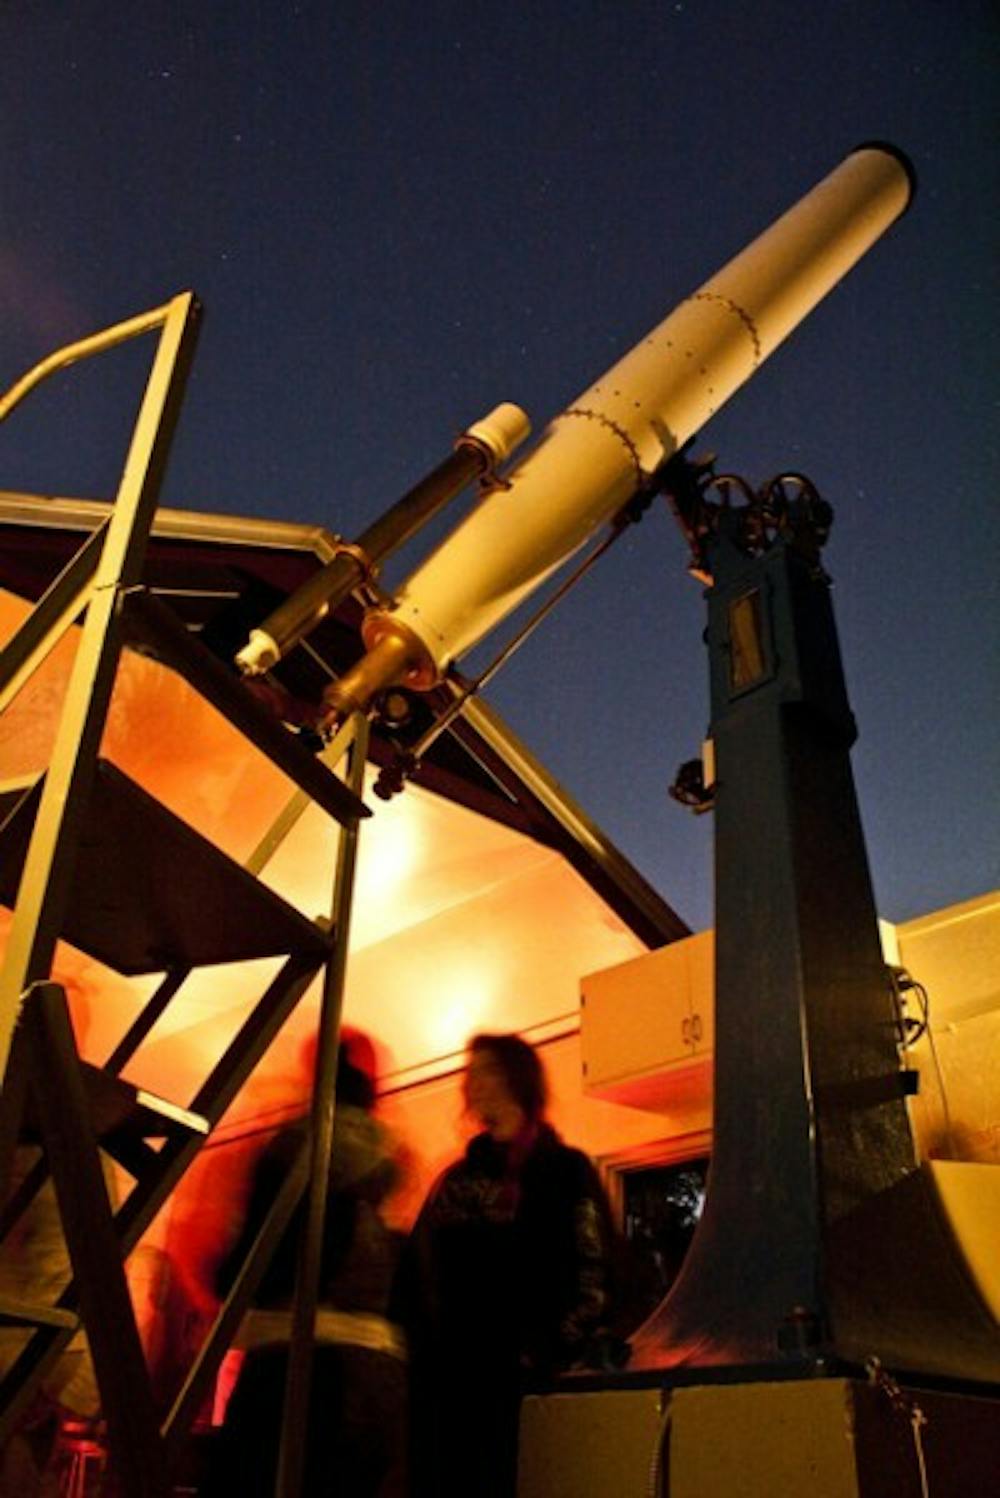 <p>One of the telescopes at the UF Department of Astronomy's Teaching Observatory aims at the starry night sky. The observatory is free to the public every Friday from 8:30 to 10 p.m.</p>